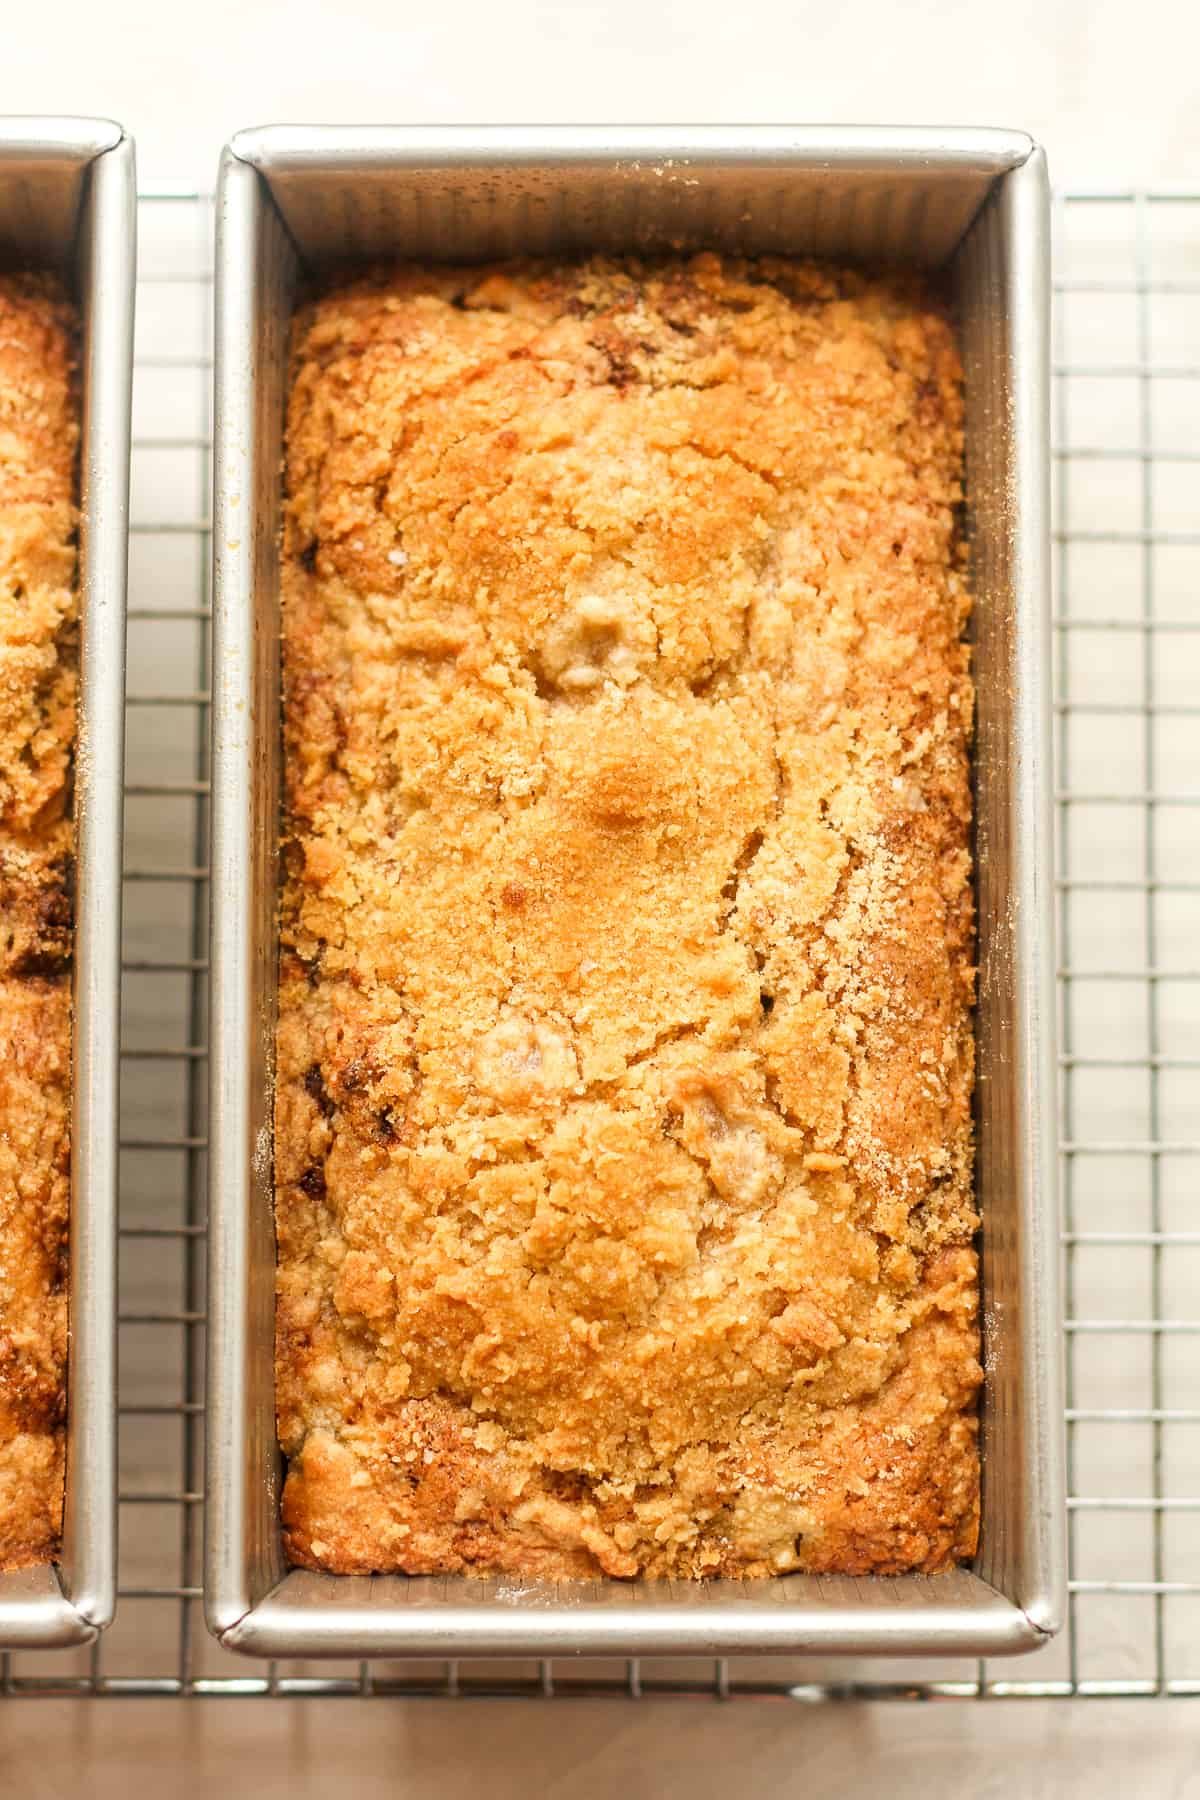 Two pans of baked rhubarb bread.